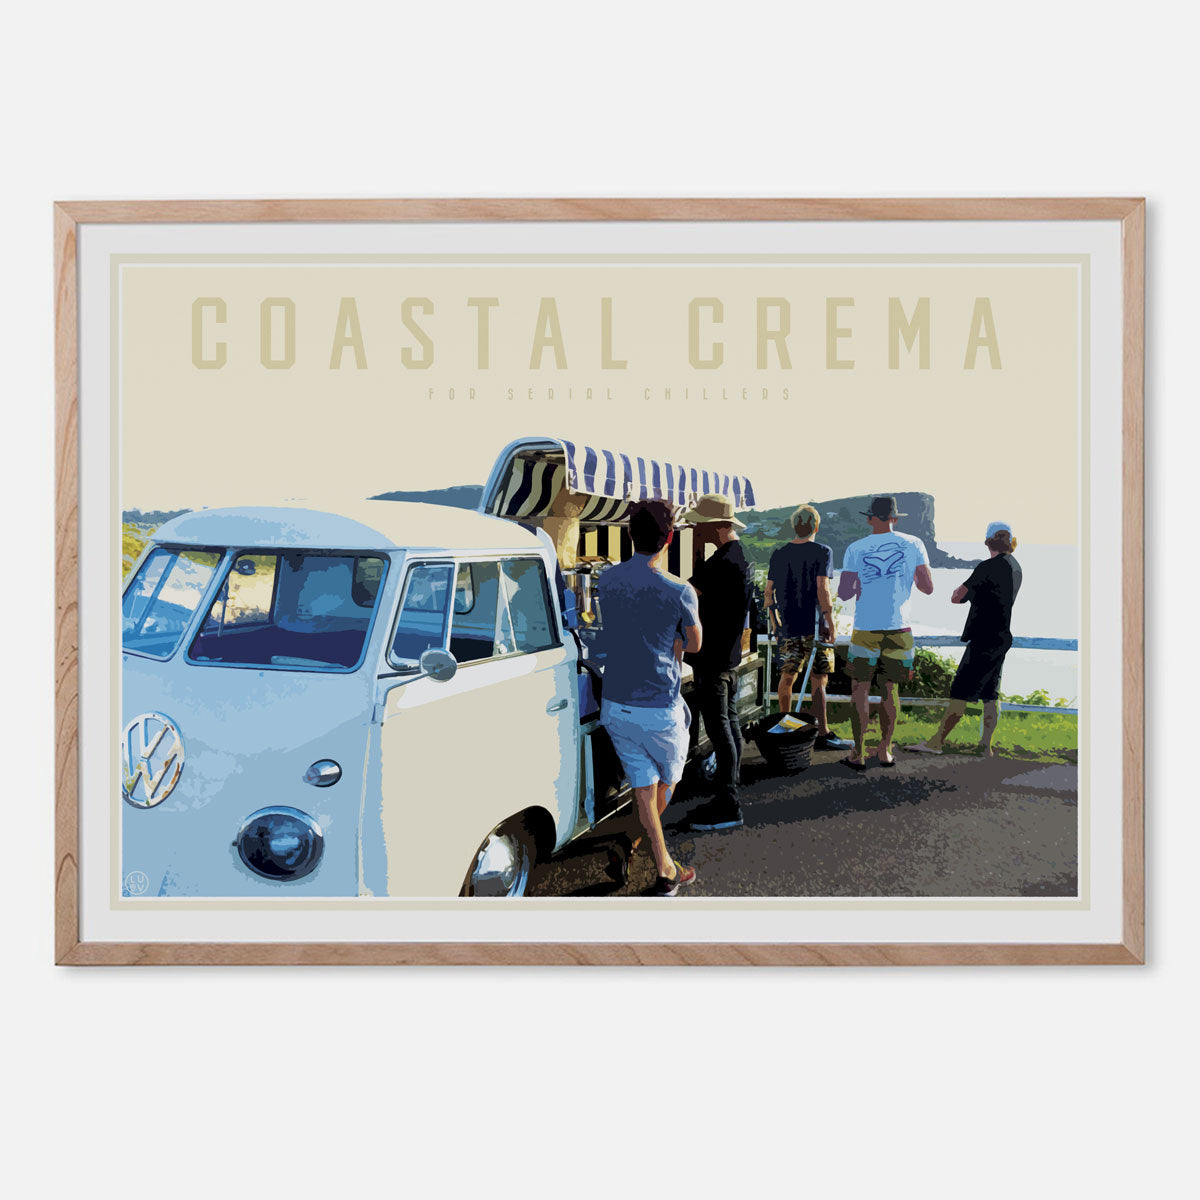 Coastal crema print in oak frame by Placesweluv 